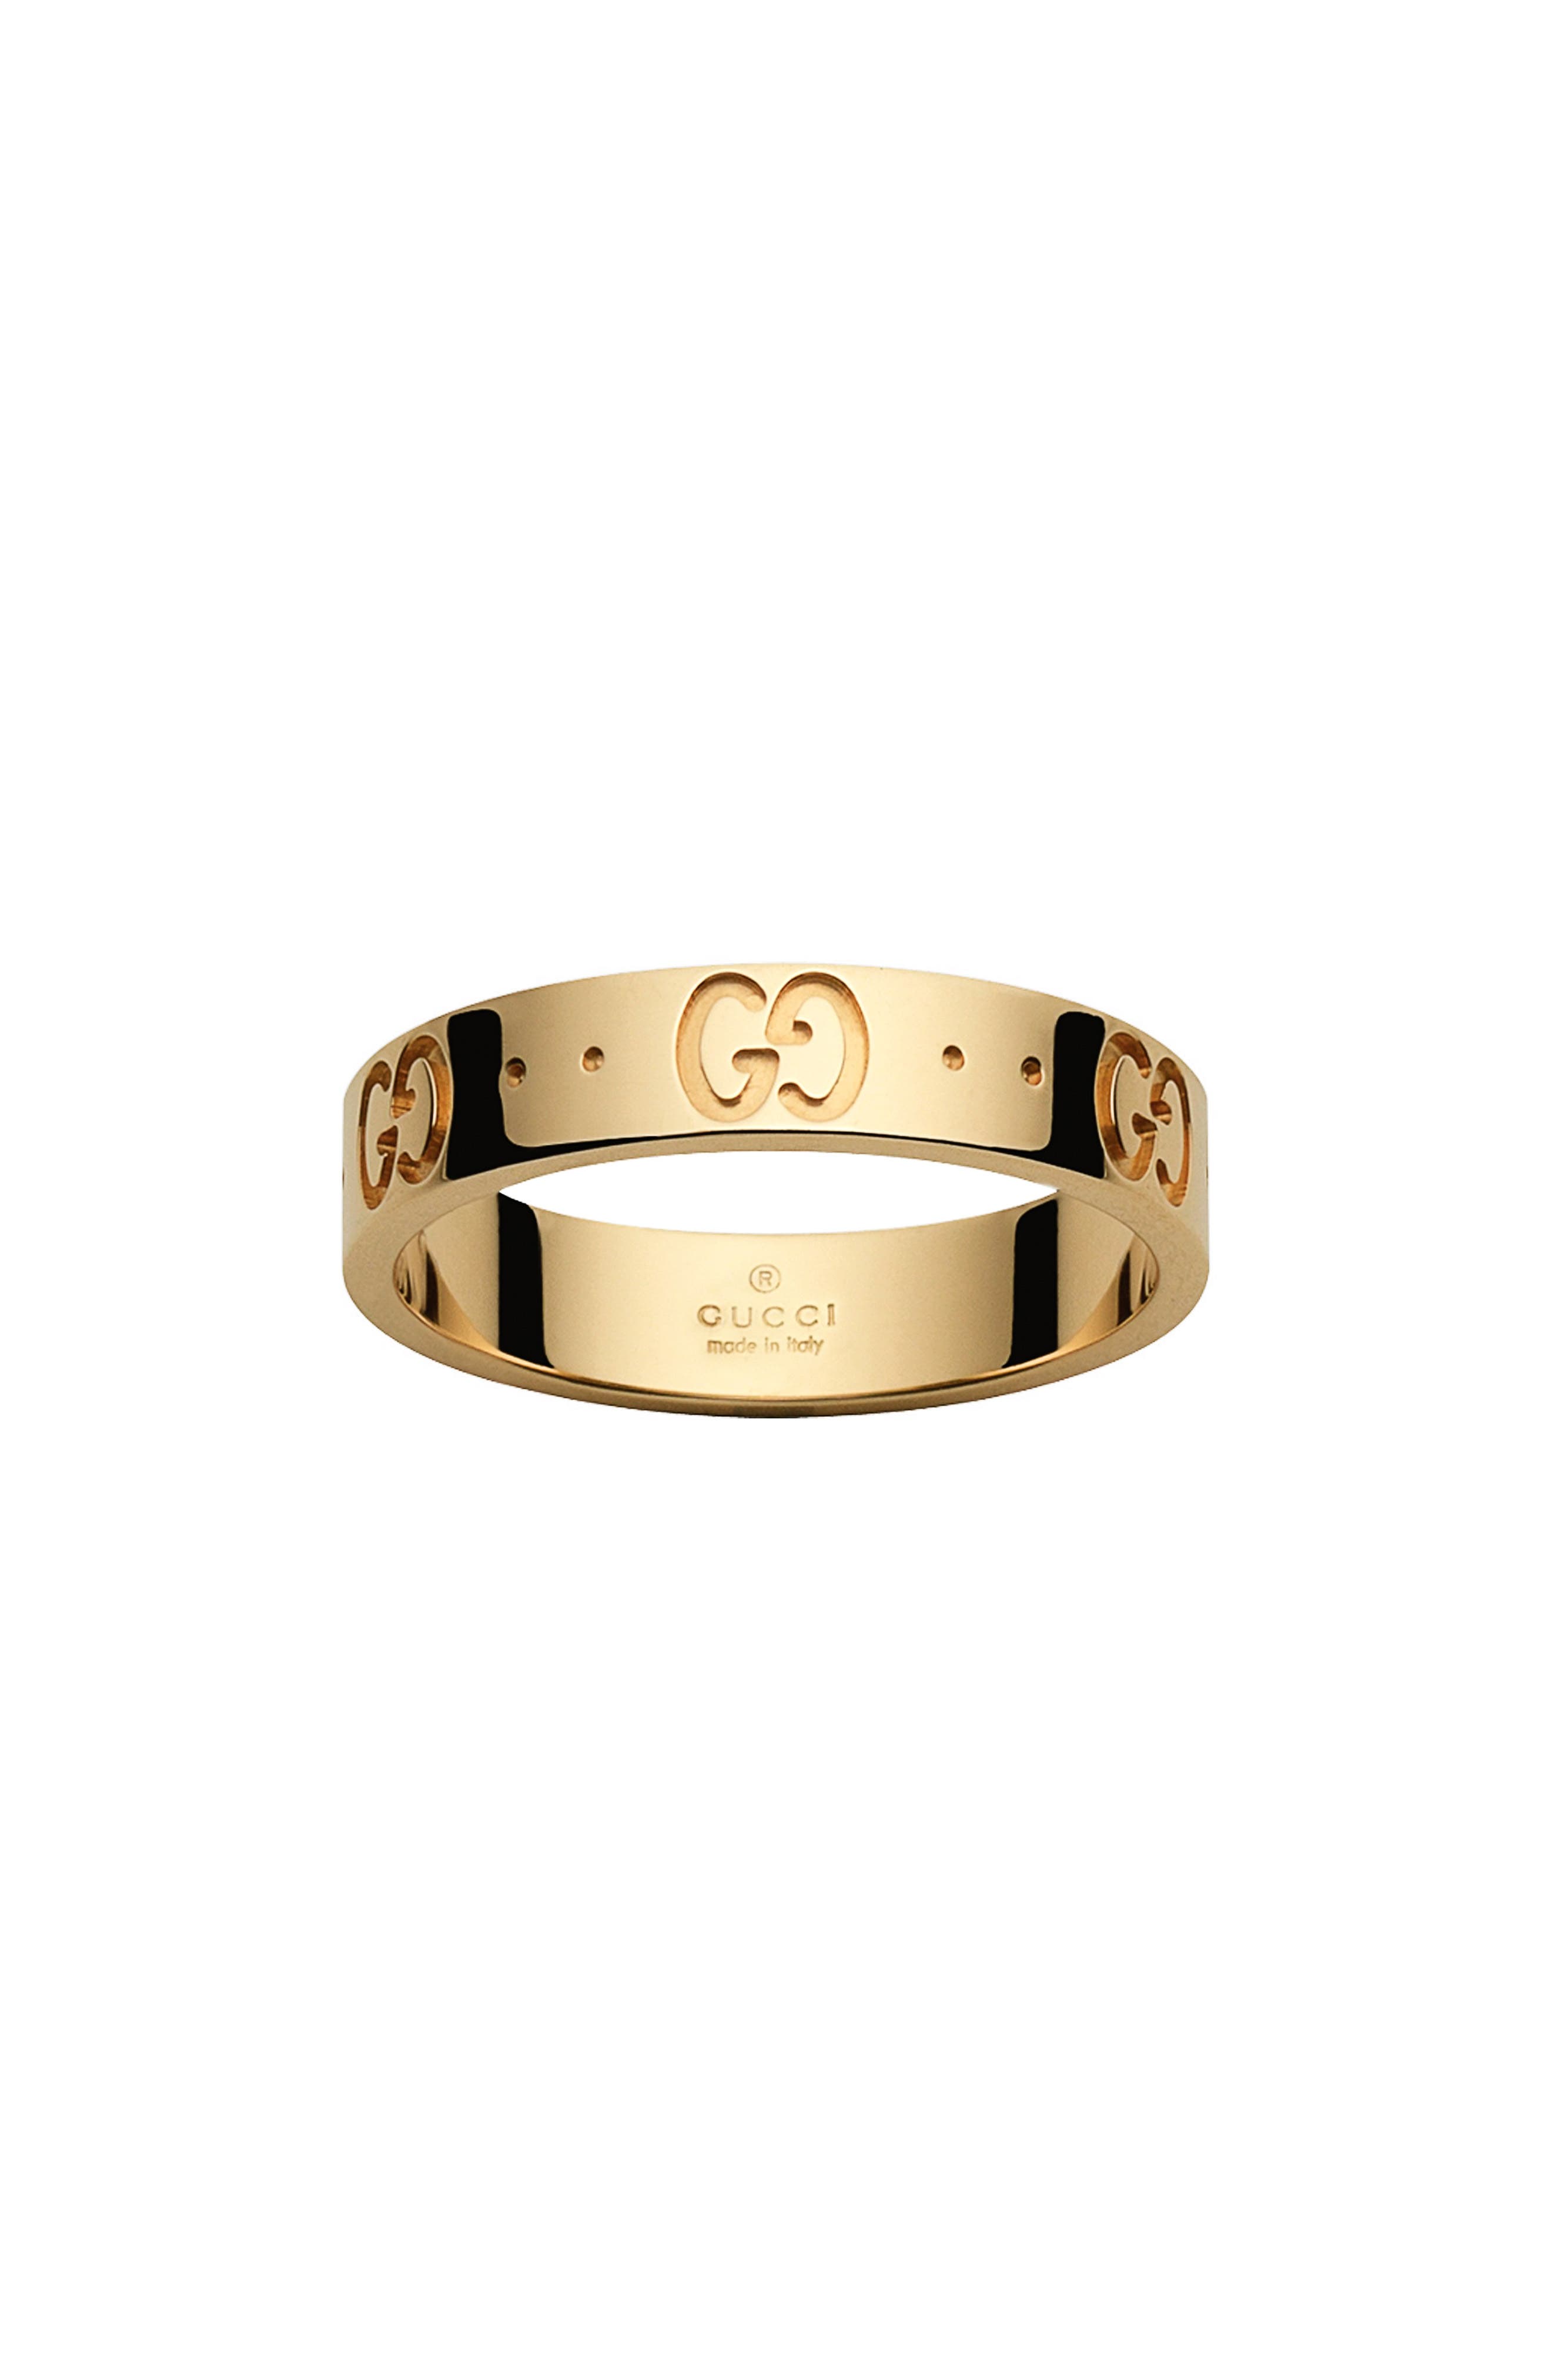 gucci ring cost